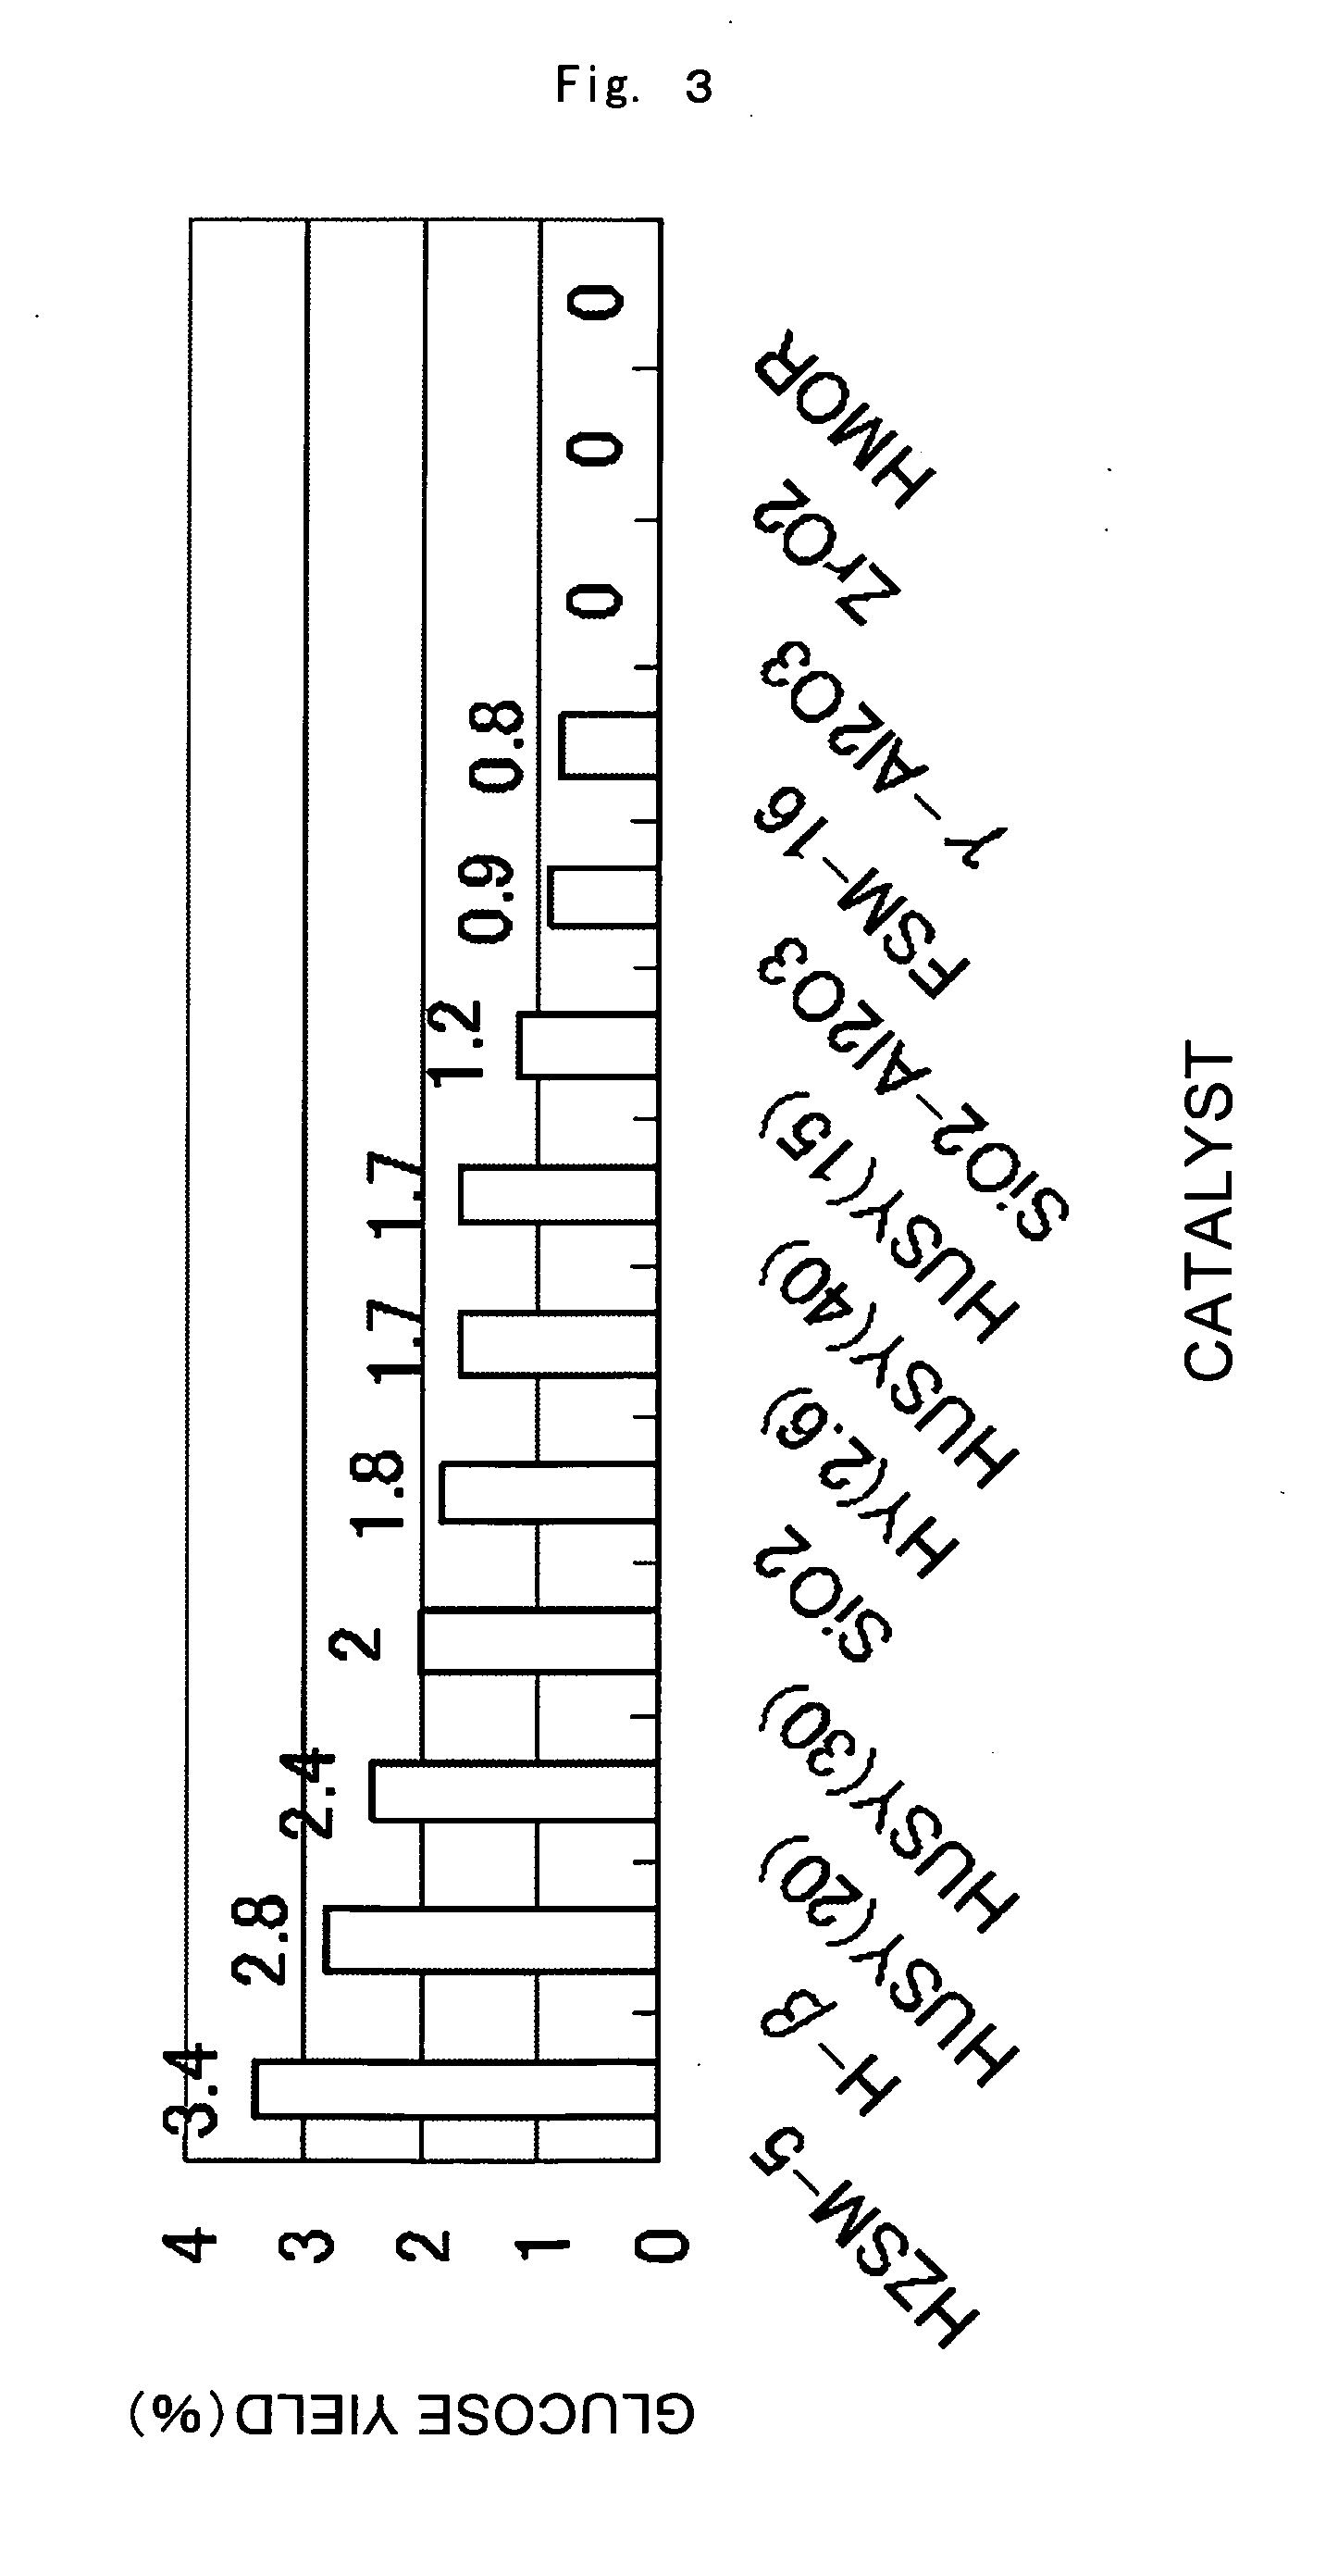 Catalyst for Cellulose Hydrolysis and/or Reduction of Cellulose Hydrolysis Products and Method of Producing Sugar Alcohols From Cellulose